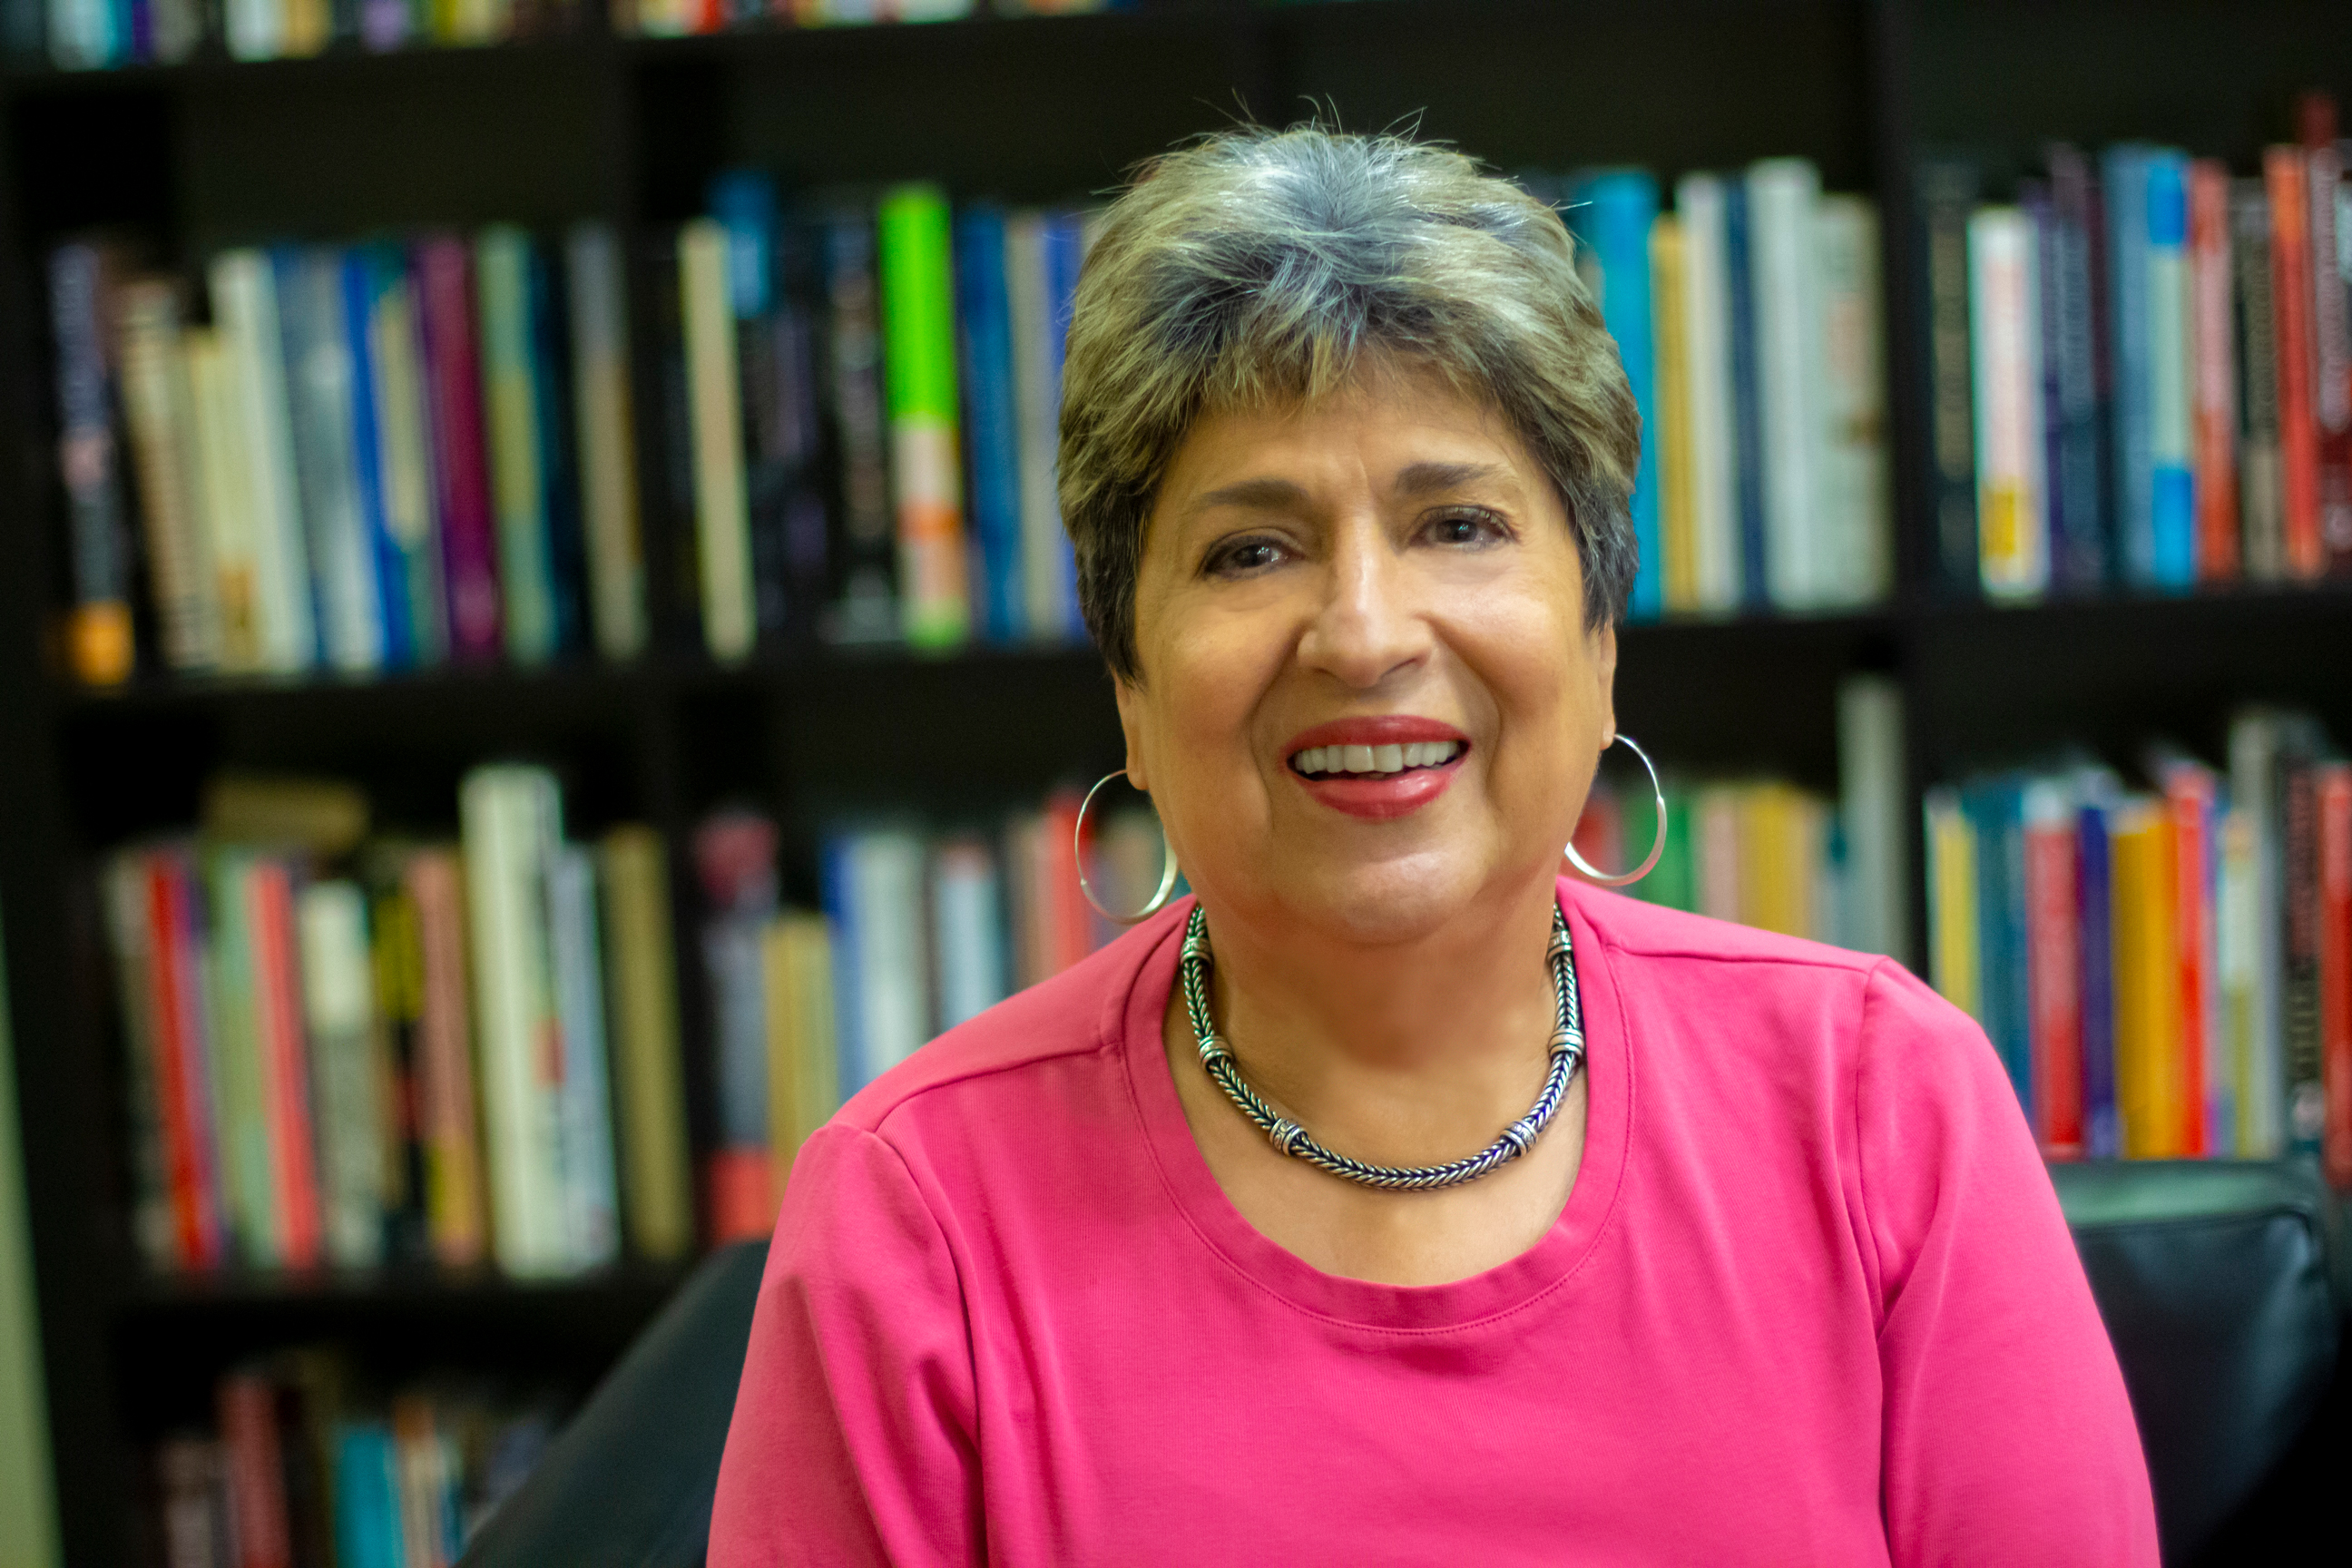 Ofelia Garcia, smiles for a photo while wearing bright pink clothing and sitting in front of book shelves. 